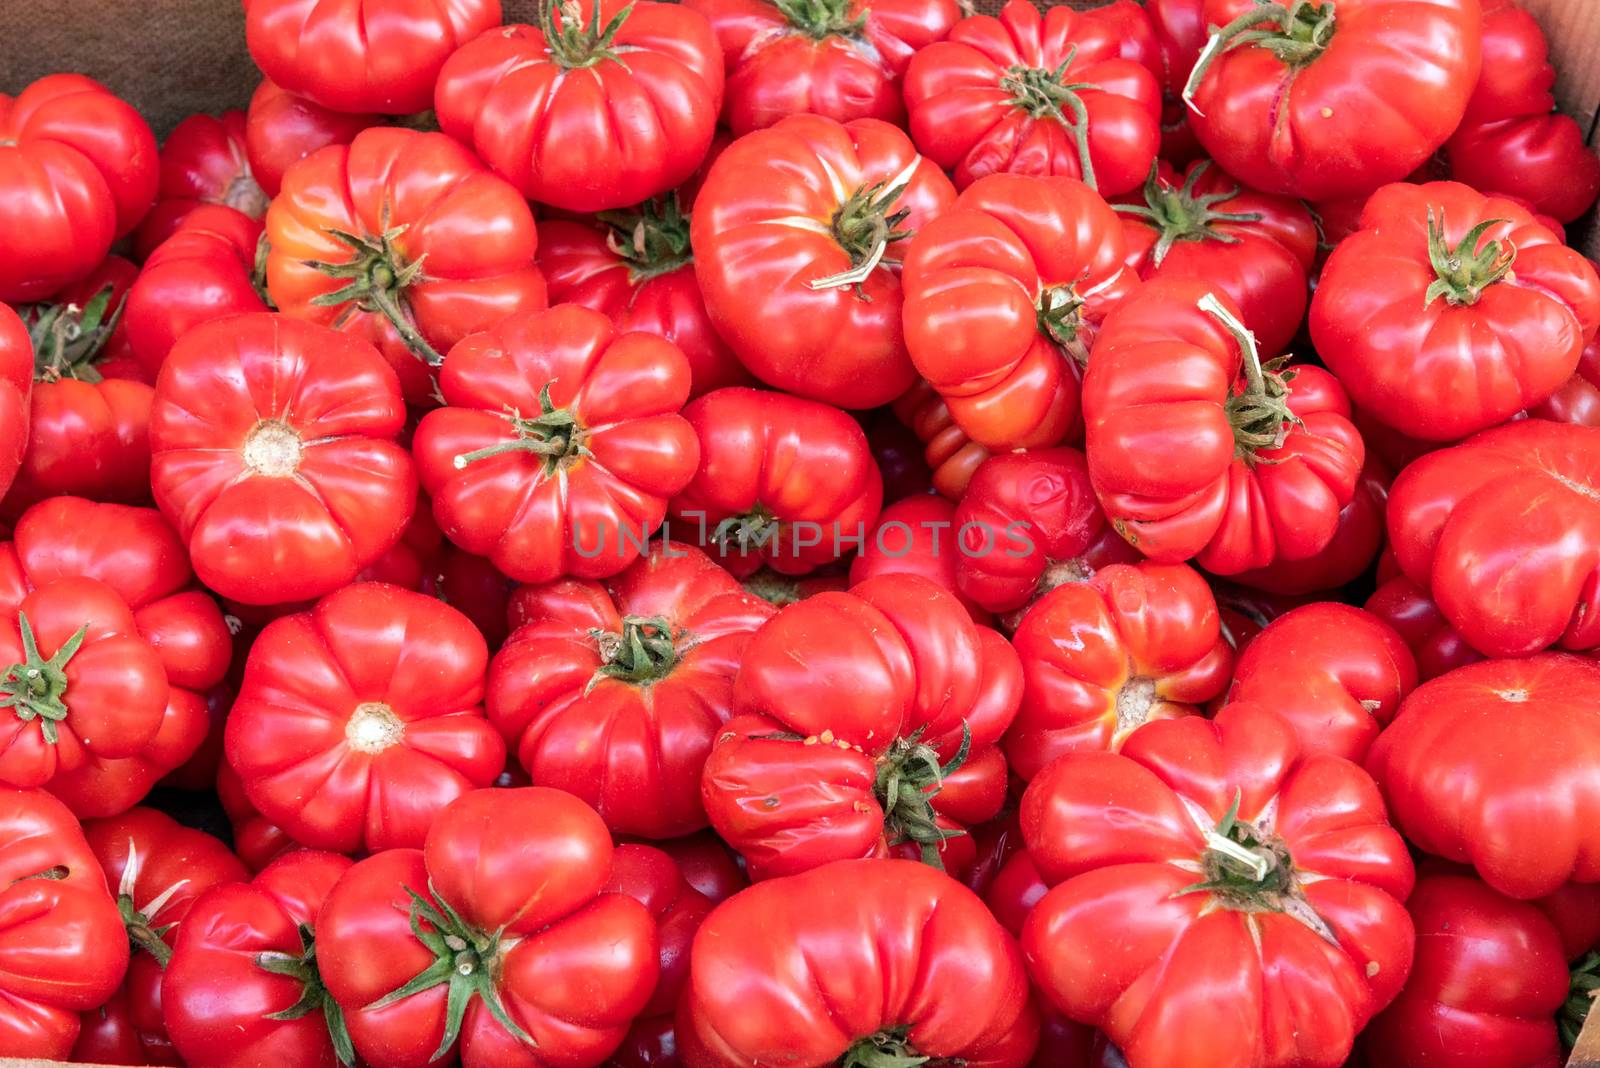 Ripped sicilian tomatoes for sale at a market